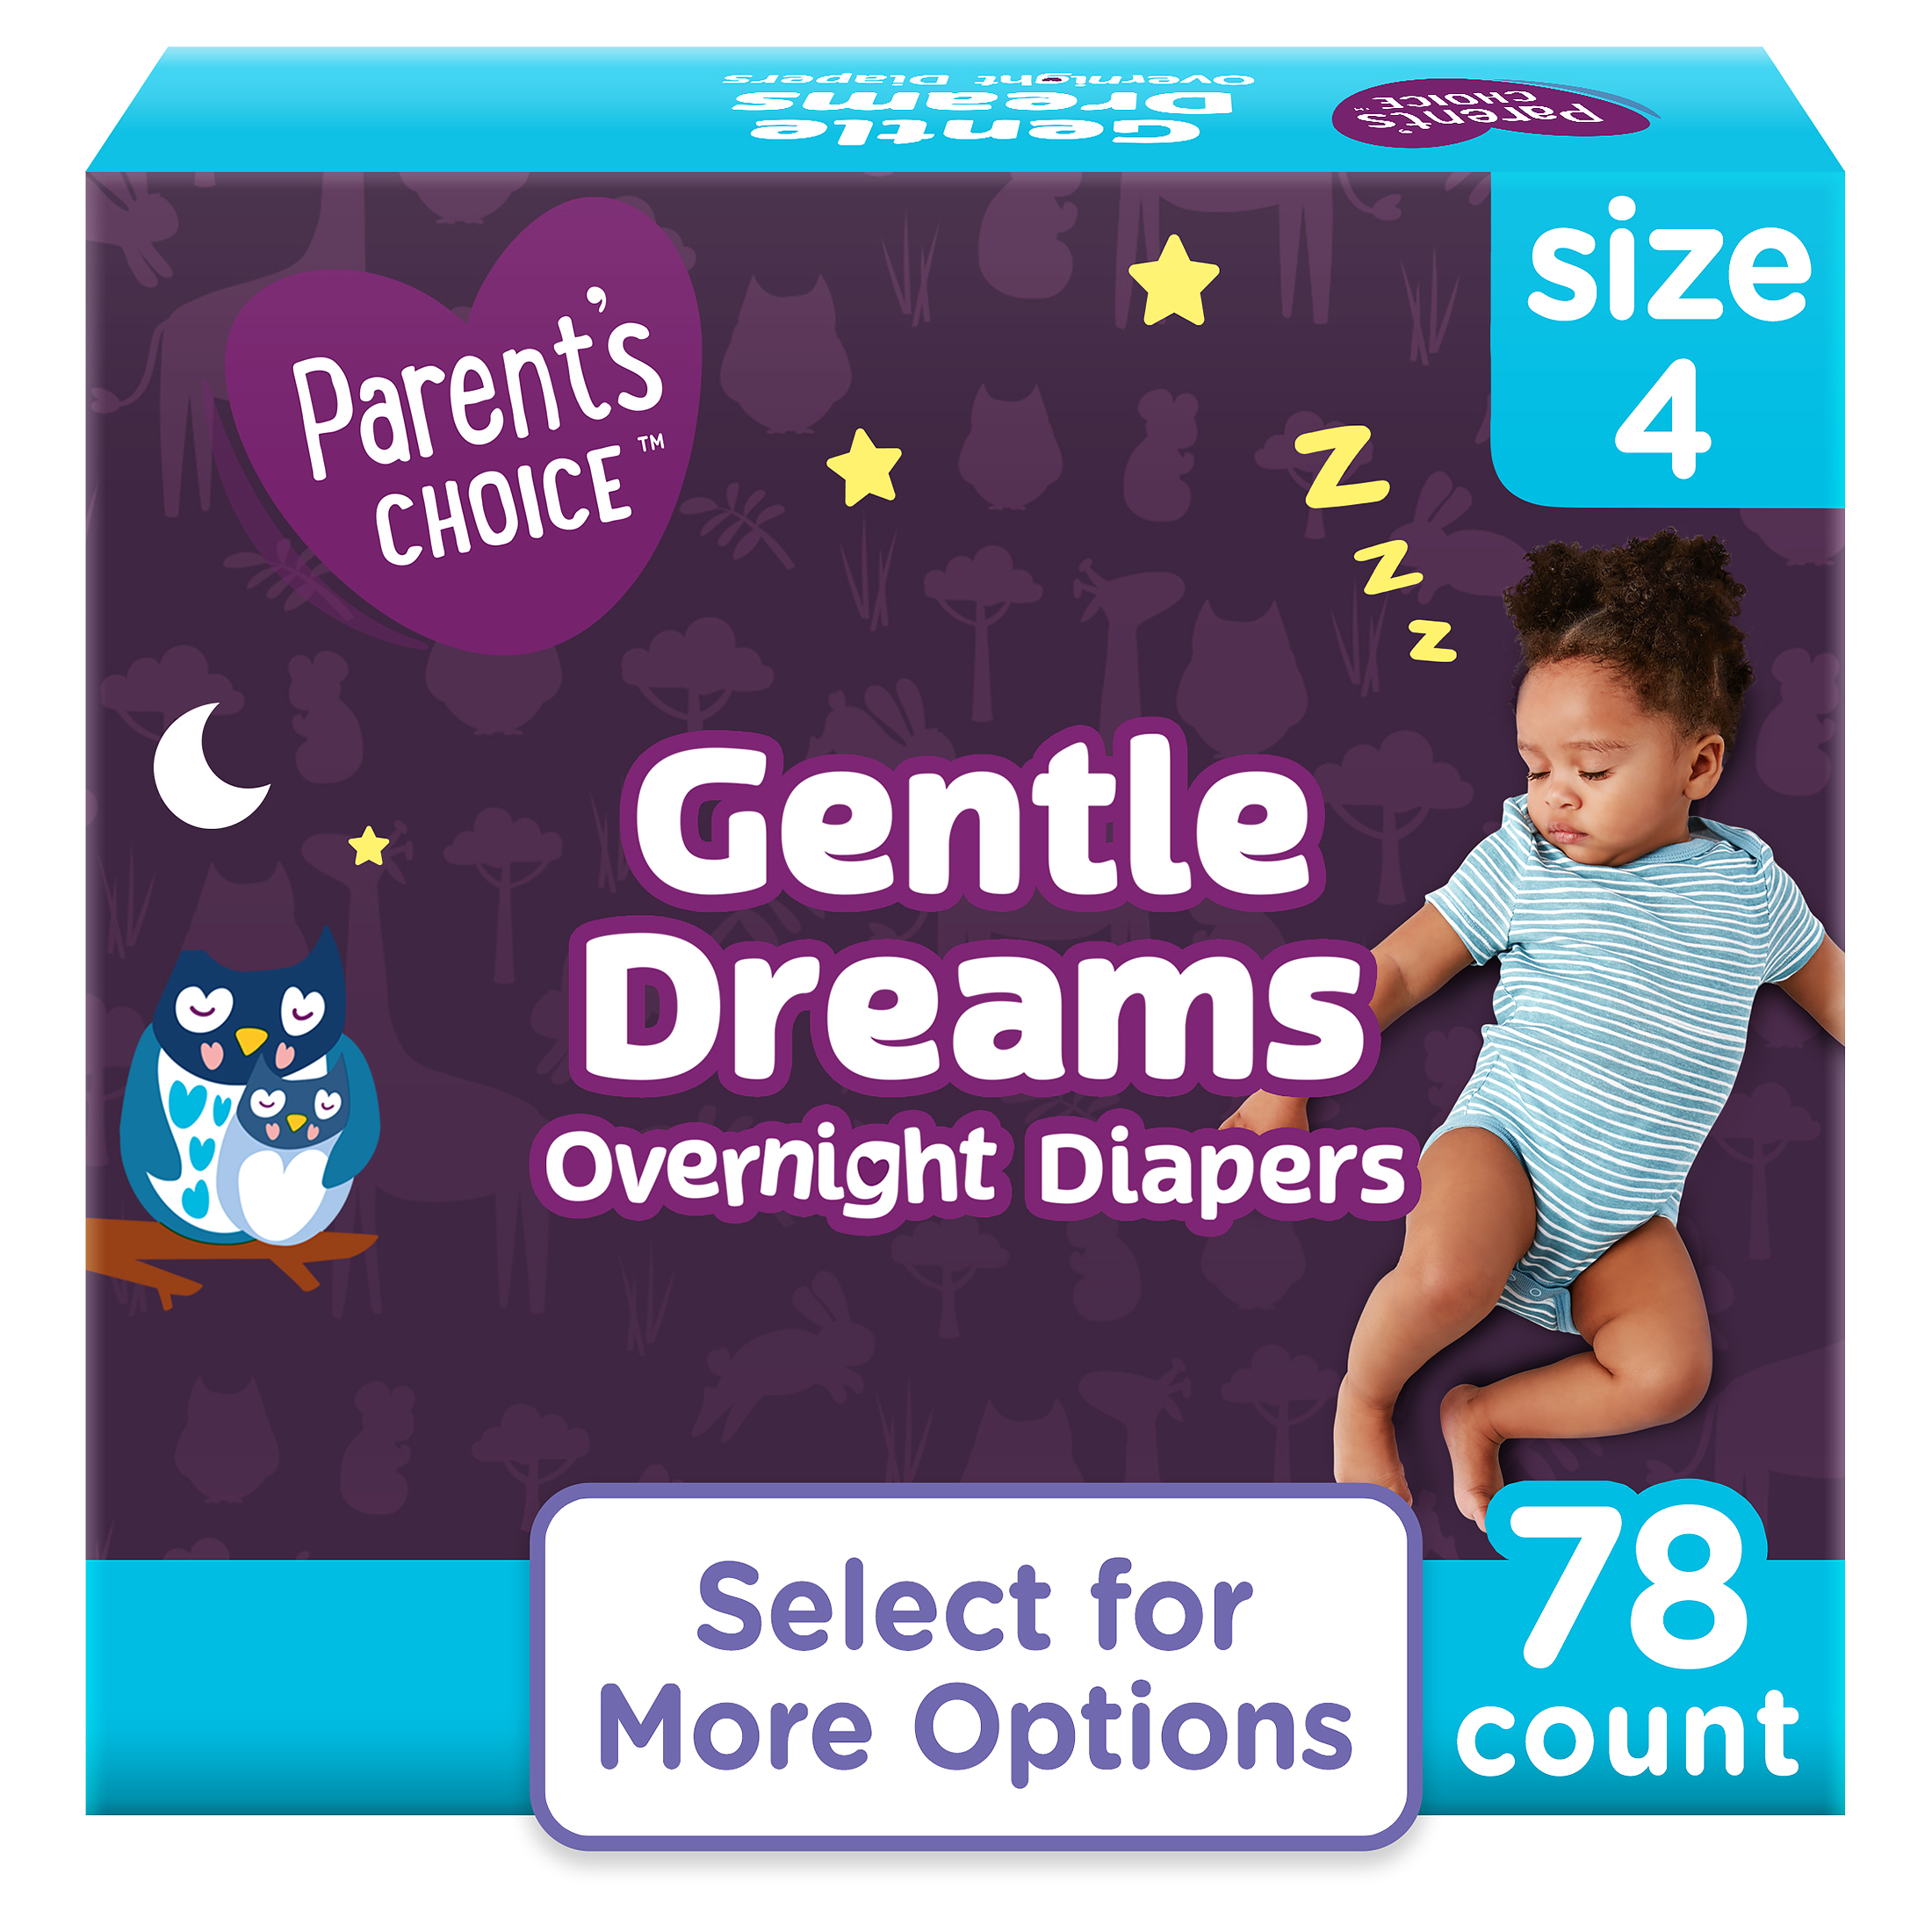 Parent's Choice Gentle Dreams Overnight Diapers, Size 4, 78 Count - image 1 of 10